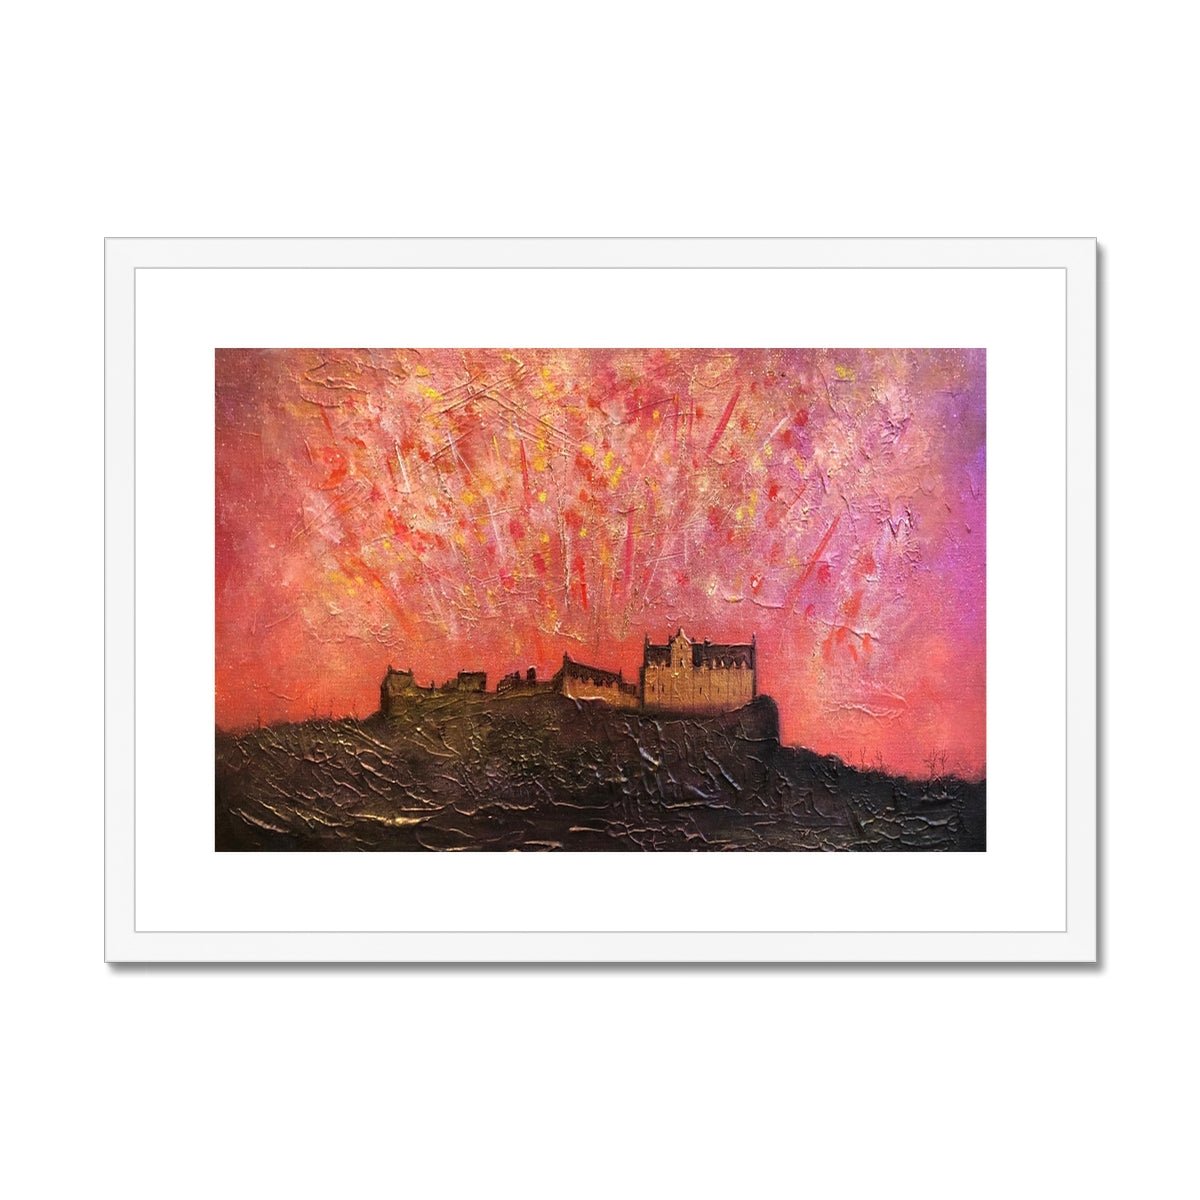 Edinburgh Castle Fireworks Painting | Framed & Mounted Prints From Scotland-Framed & Mounted Prints-Historic & Iconic Scotland Art Gallery-A2 Landscape-White Frame-Paintings, Prints, Homeware, Art Gifts From Scotland By Scottish Artist Kevin Hunter